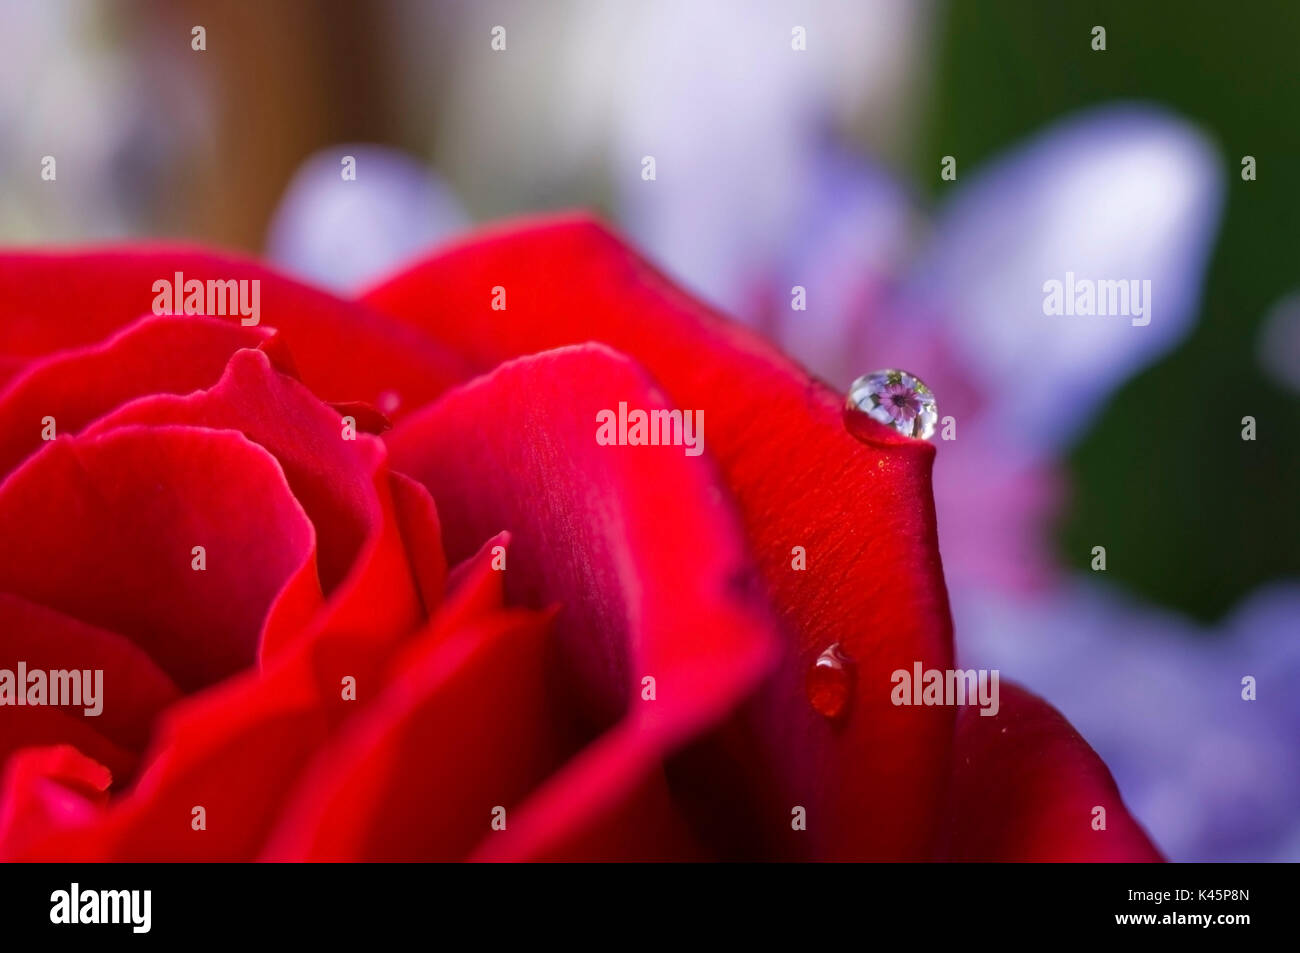 A flower reflected in a drop of water on a rose petal. Stock Photo